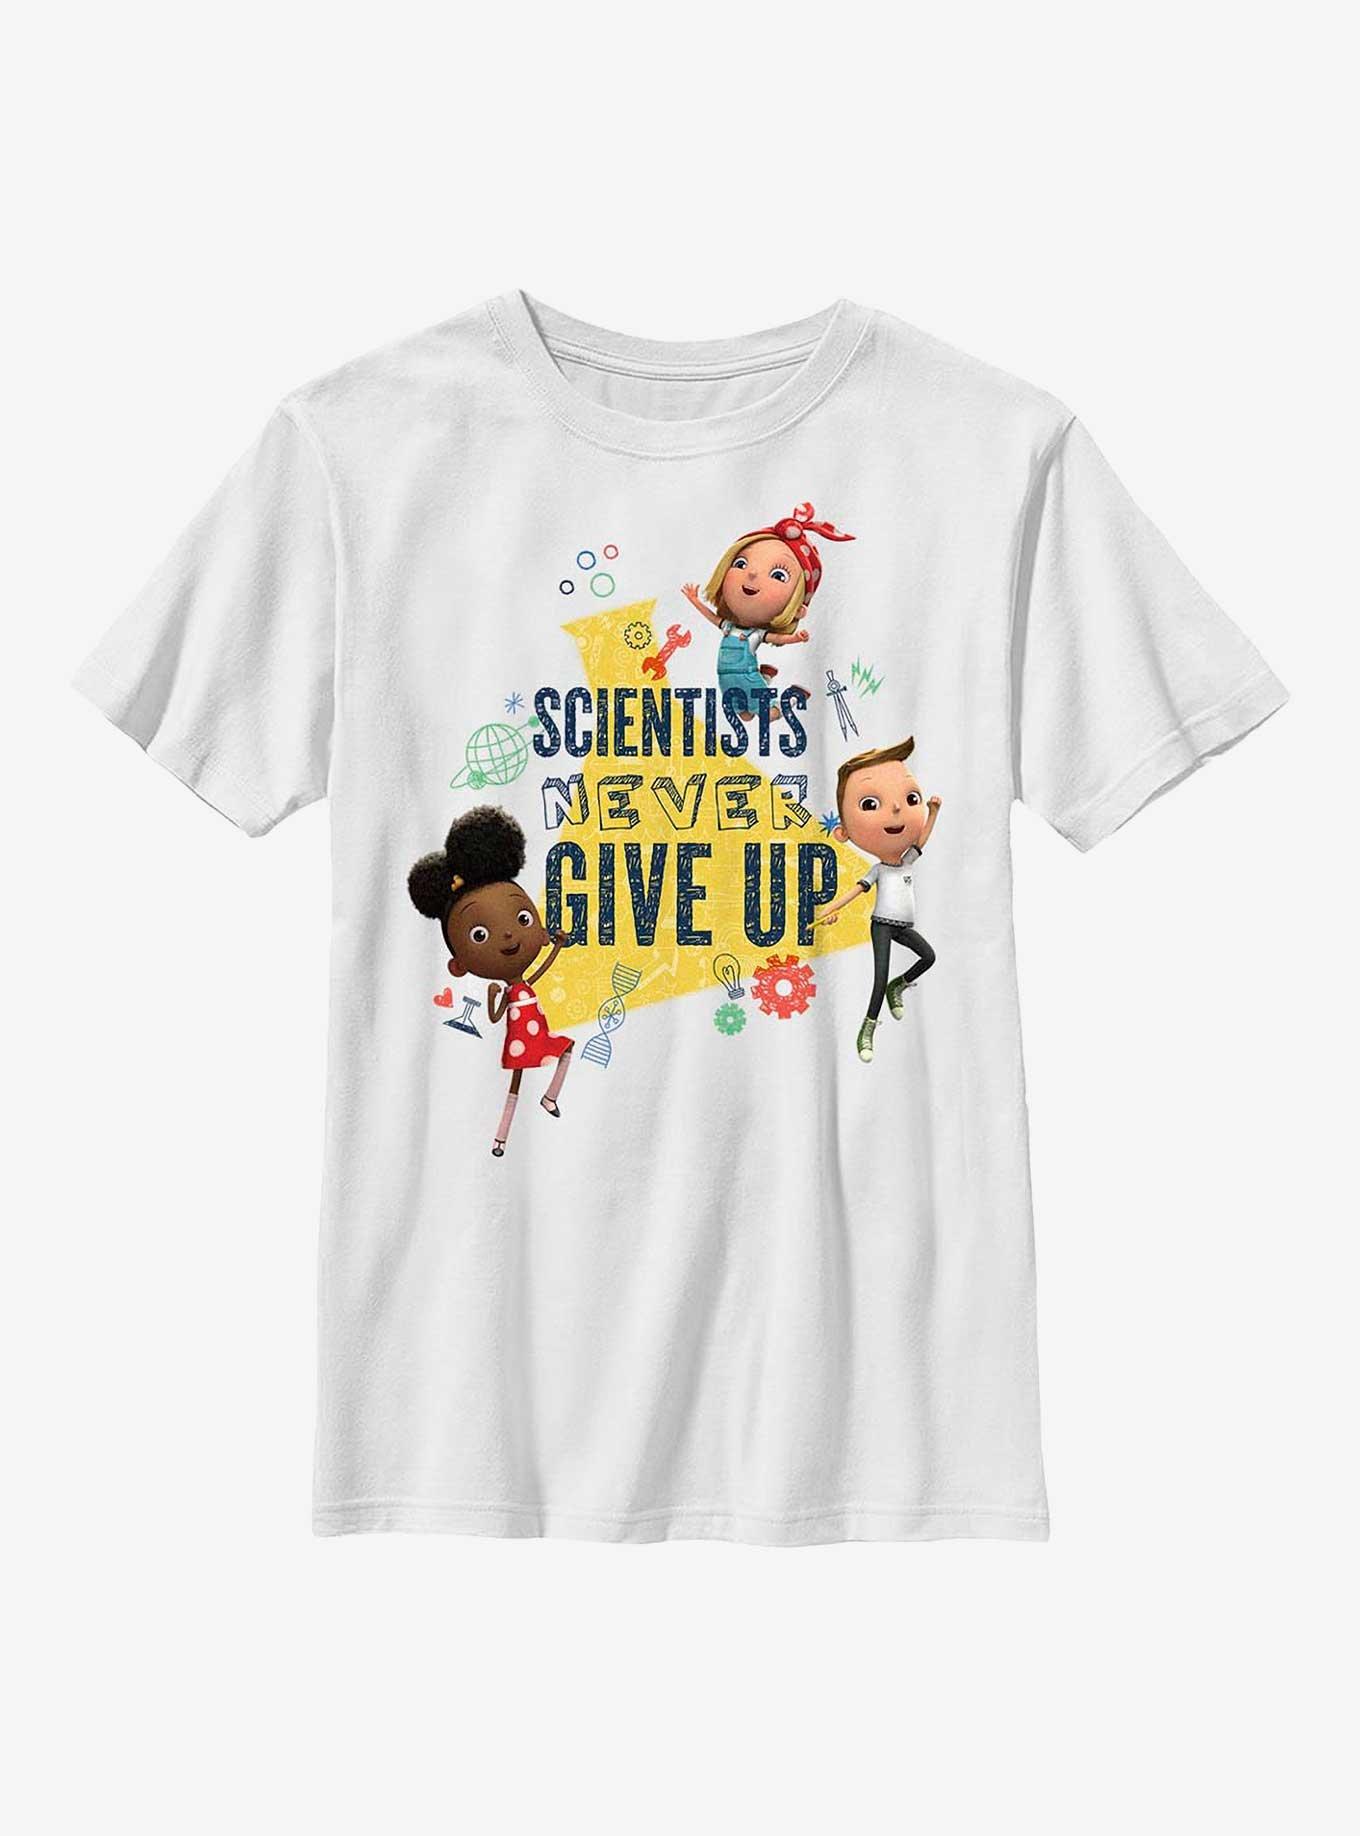 Ada Twist, Scientist Never Give Up Youth T-Shirt, WHITE, hi-res